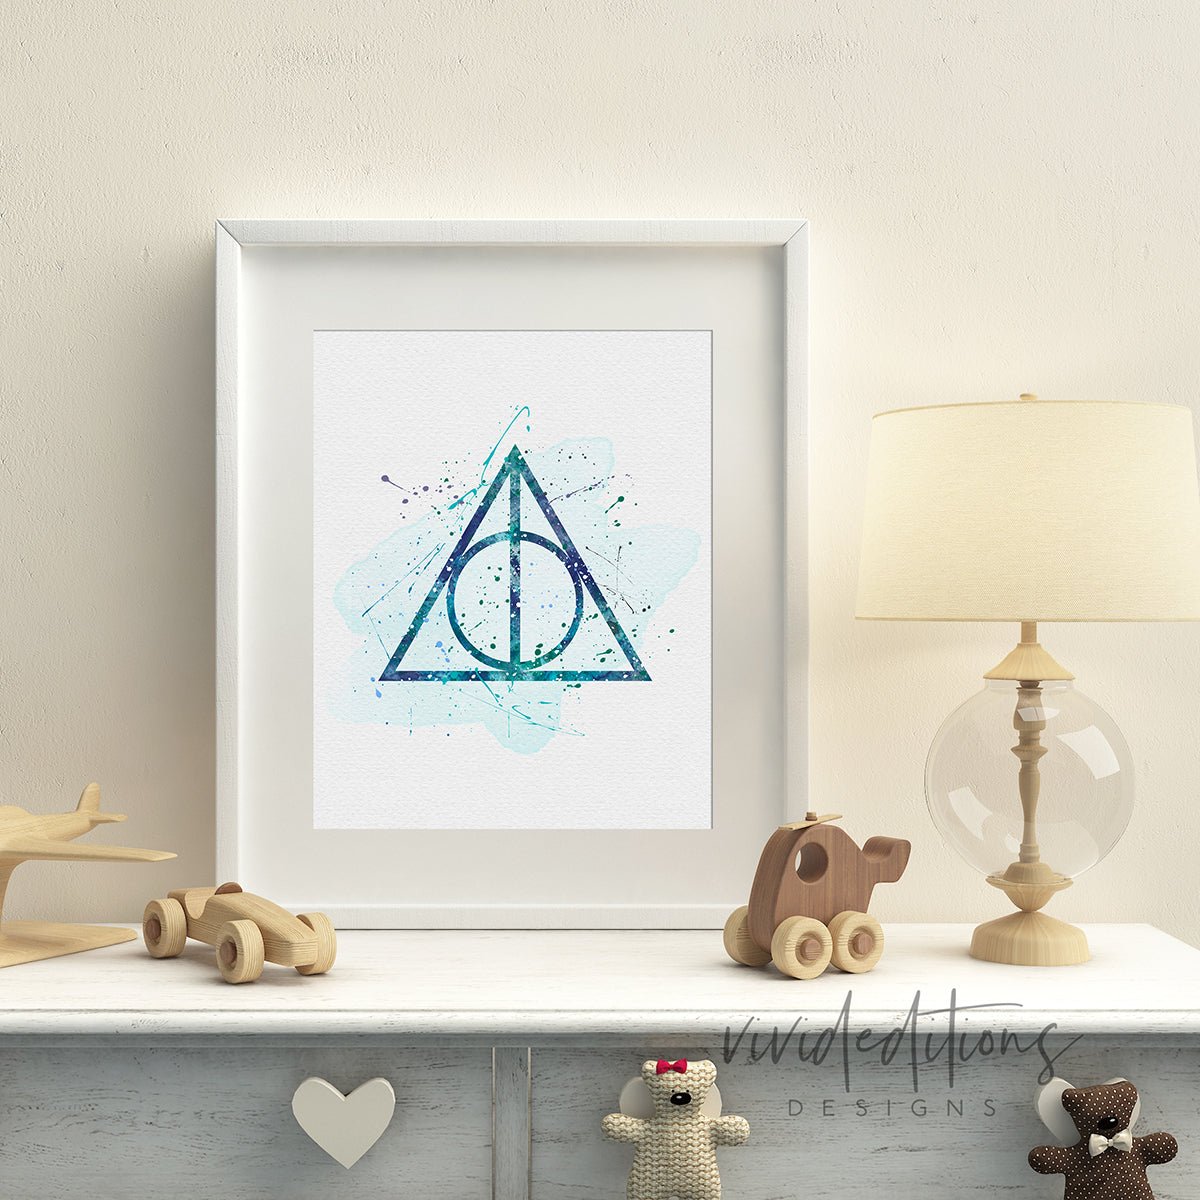 The Deathly Hallows, Harry Potter Watercolor Art Print Print - VividEditions